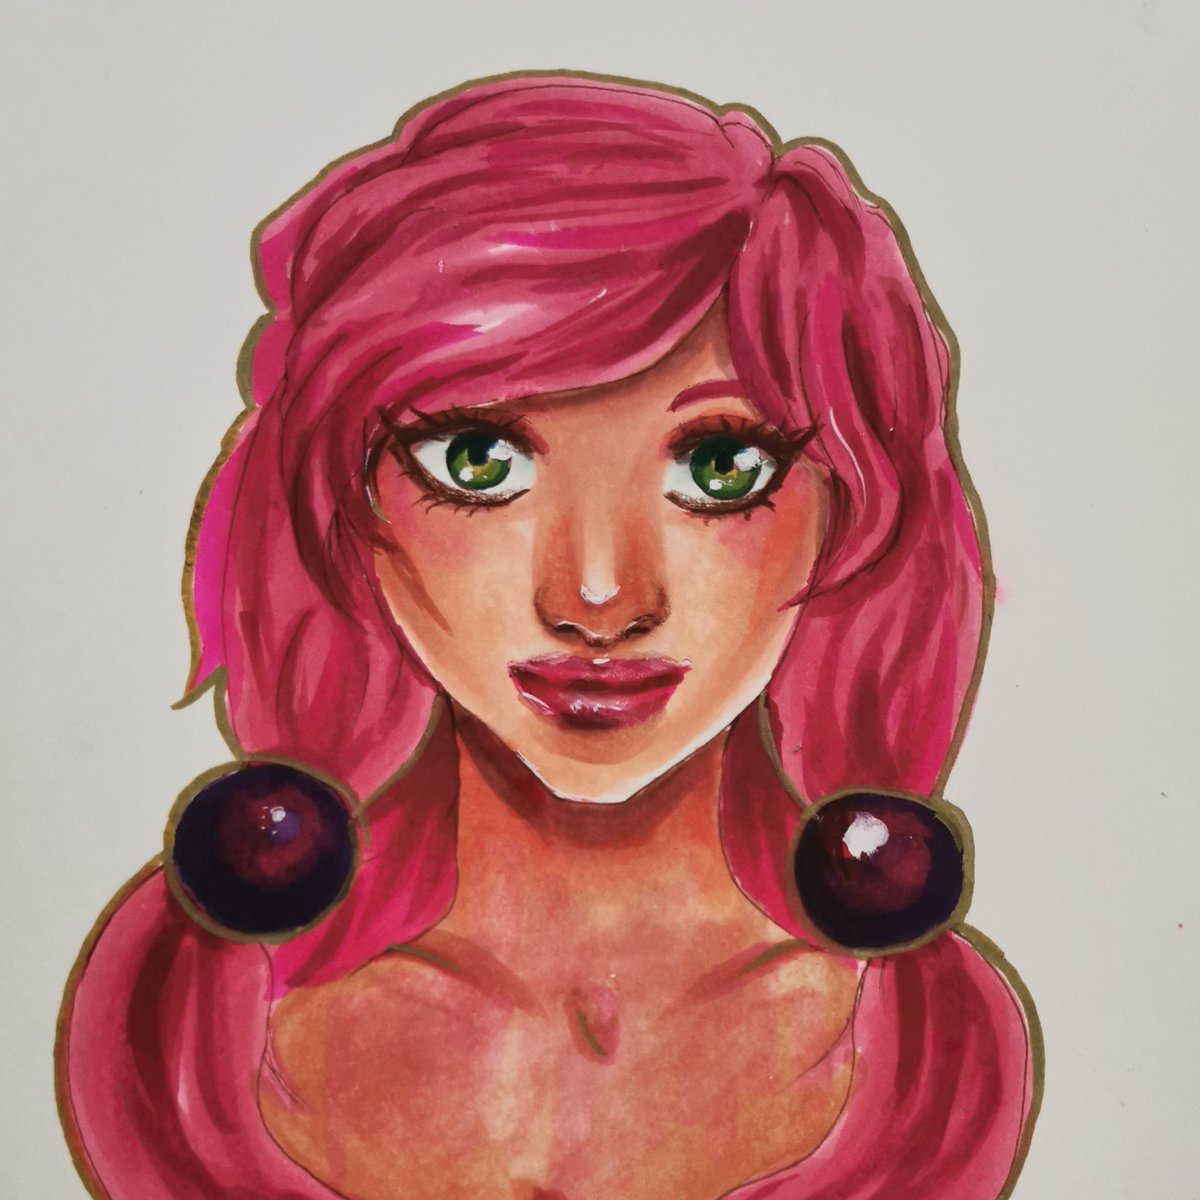 So this was my first very short marker Experiment with Ohuhu markersI wanna share my first impressions in this thread